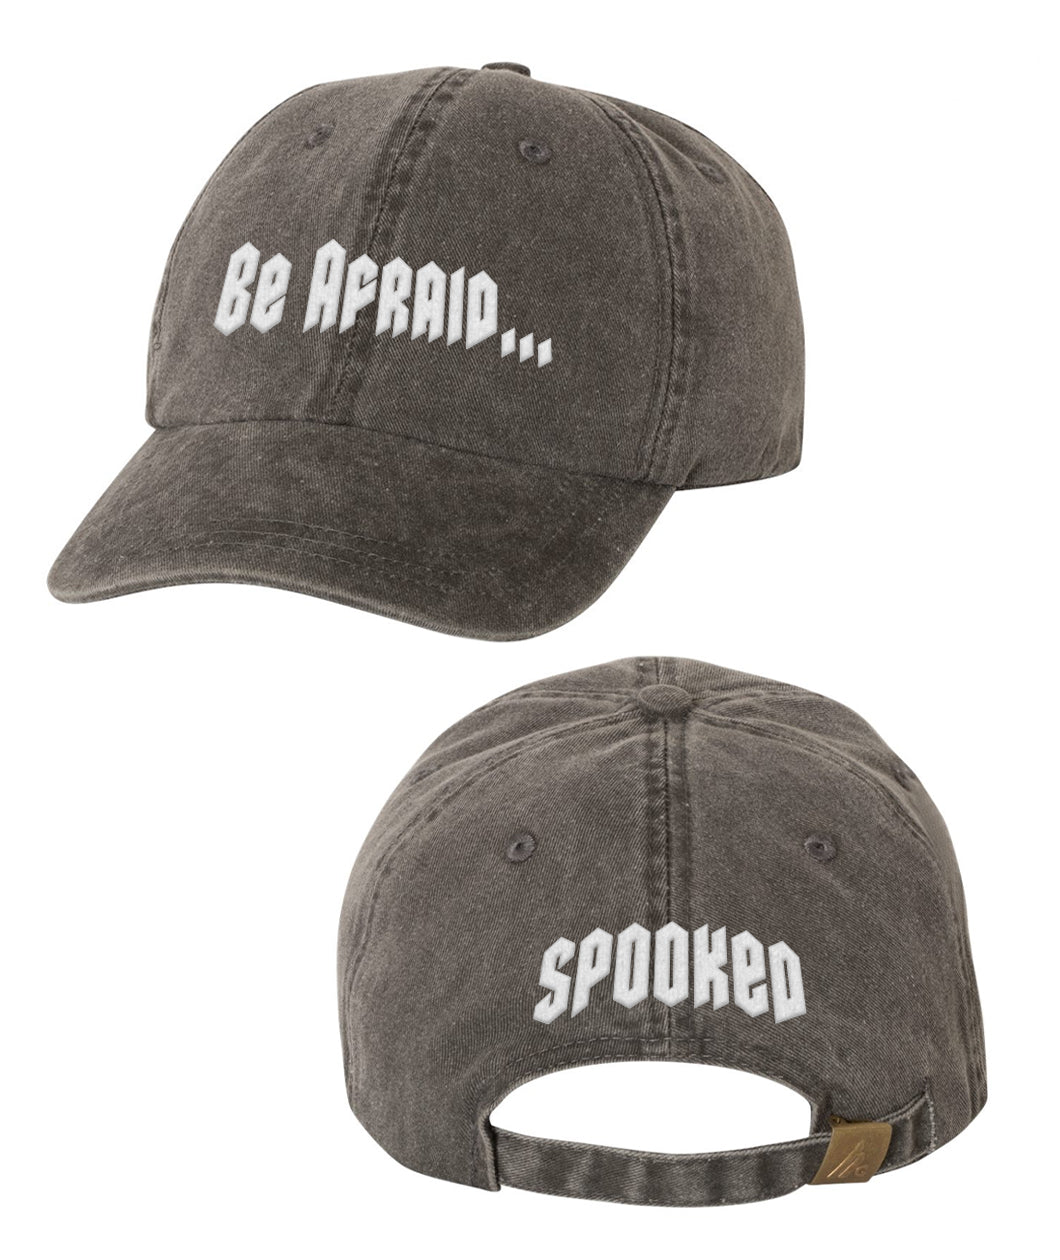 A grey ball cap with the words "Be Afraid..." embroidered in white on the front and "Spooked" embroidered in white on the back. From Snap Judgement. 